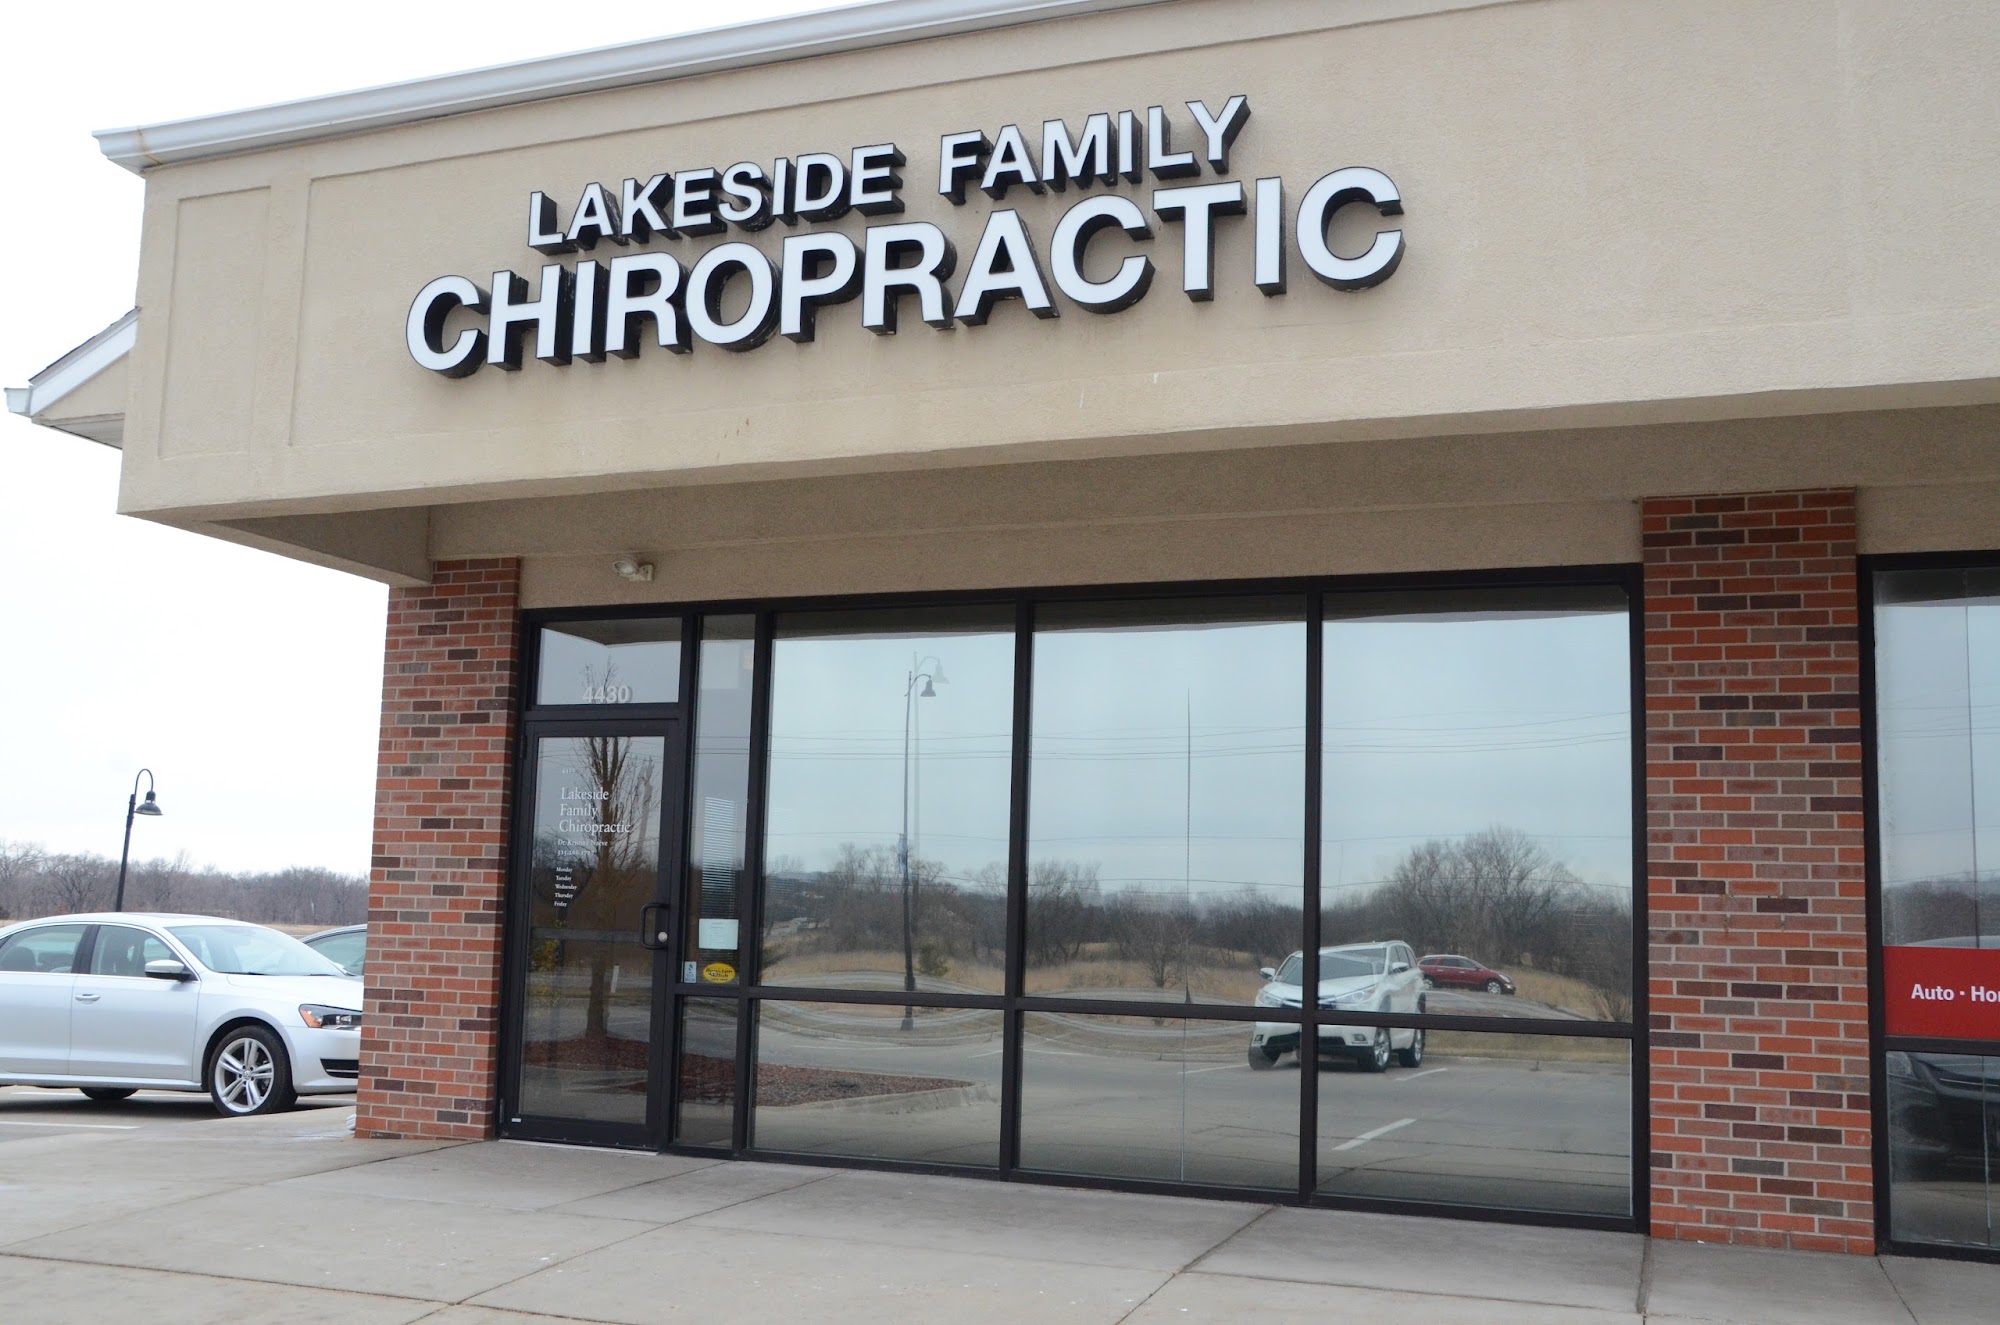 Lakeside Family Chiropractic